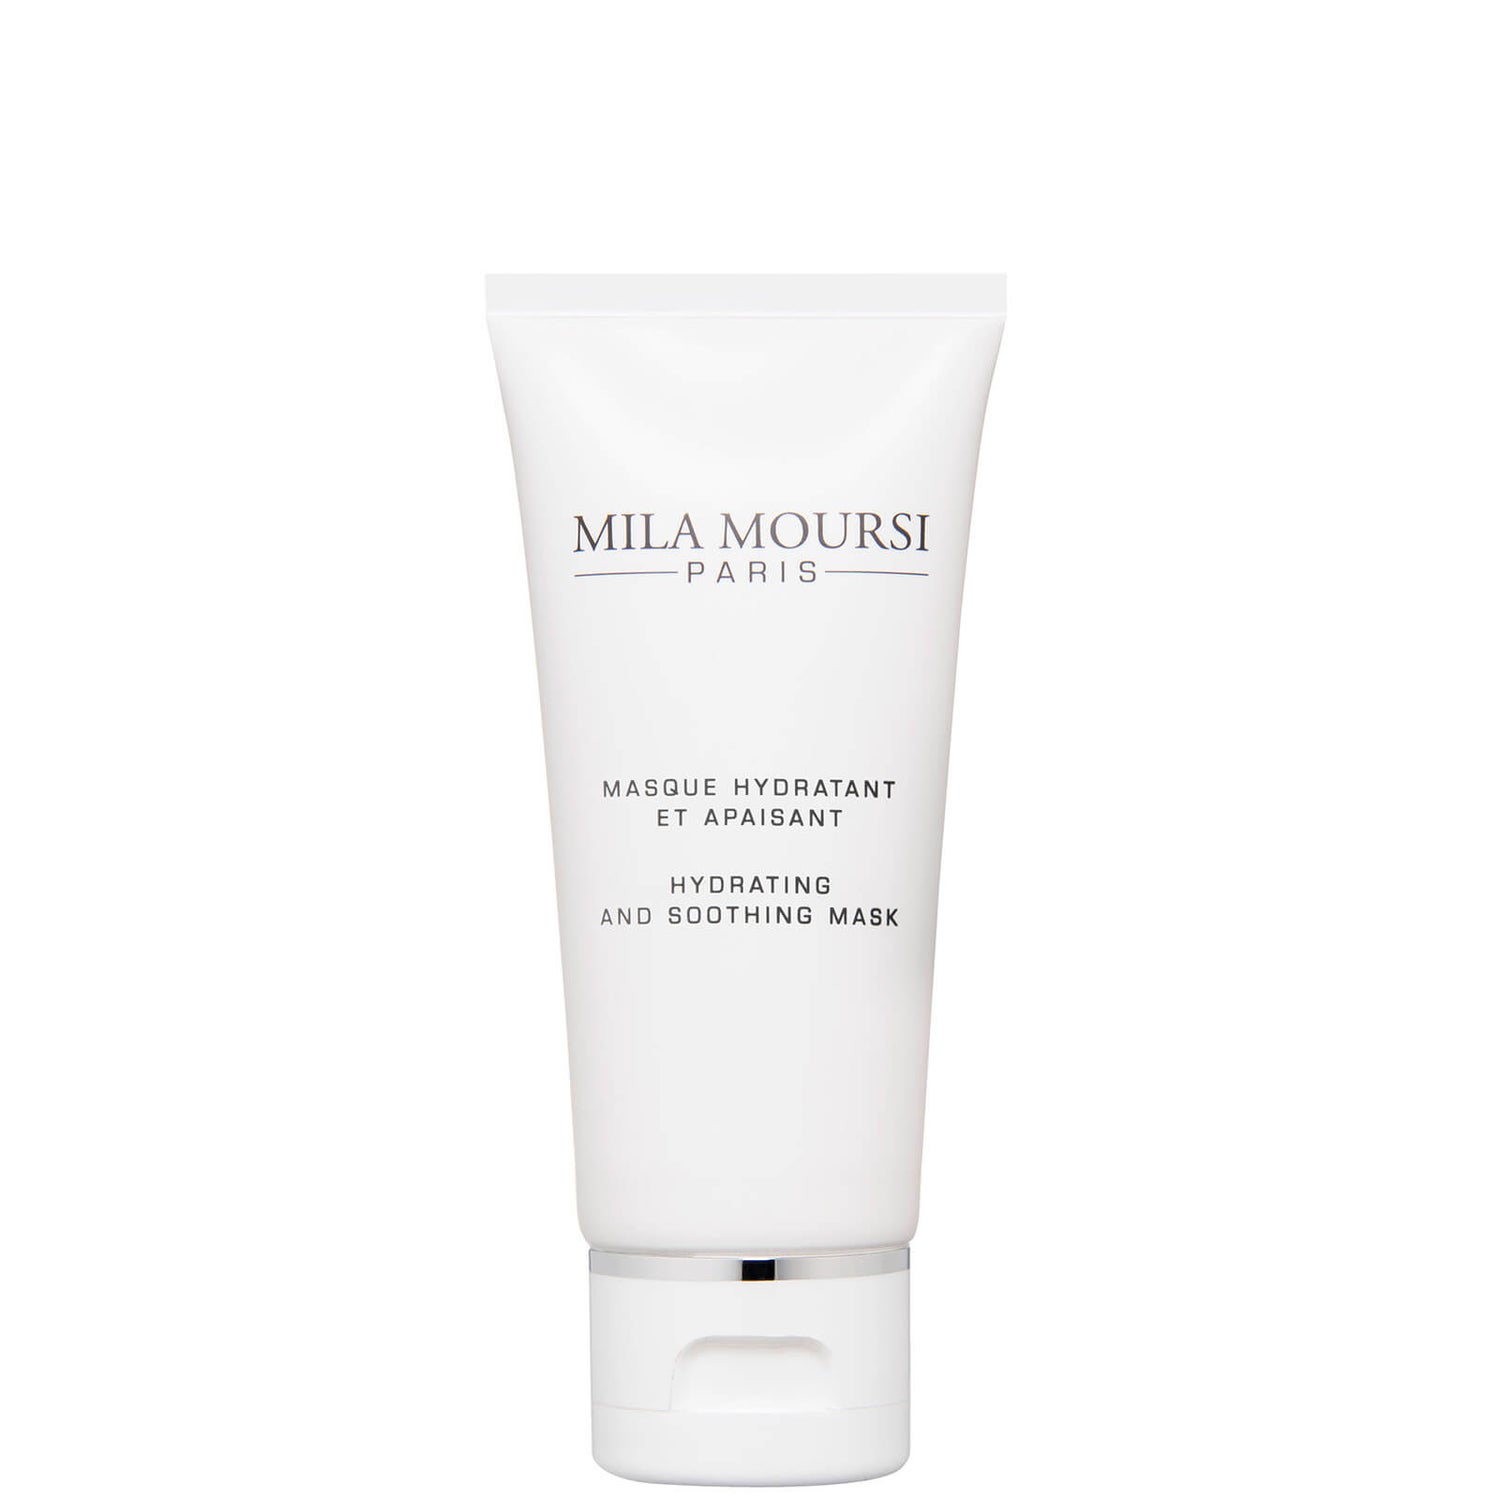 Mila Moursi Hydrating and Soothing Mask 50ml